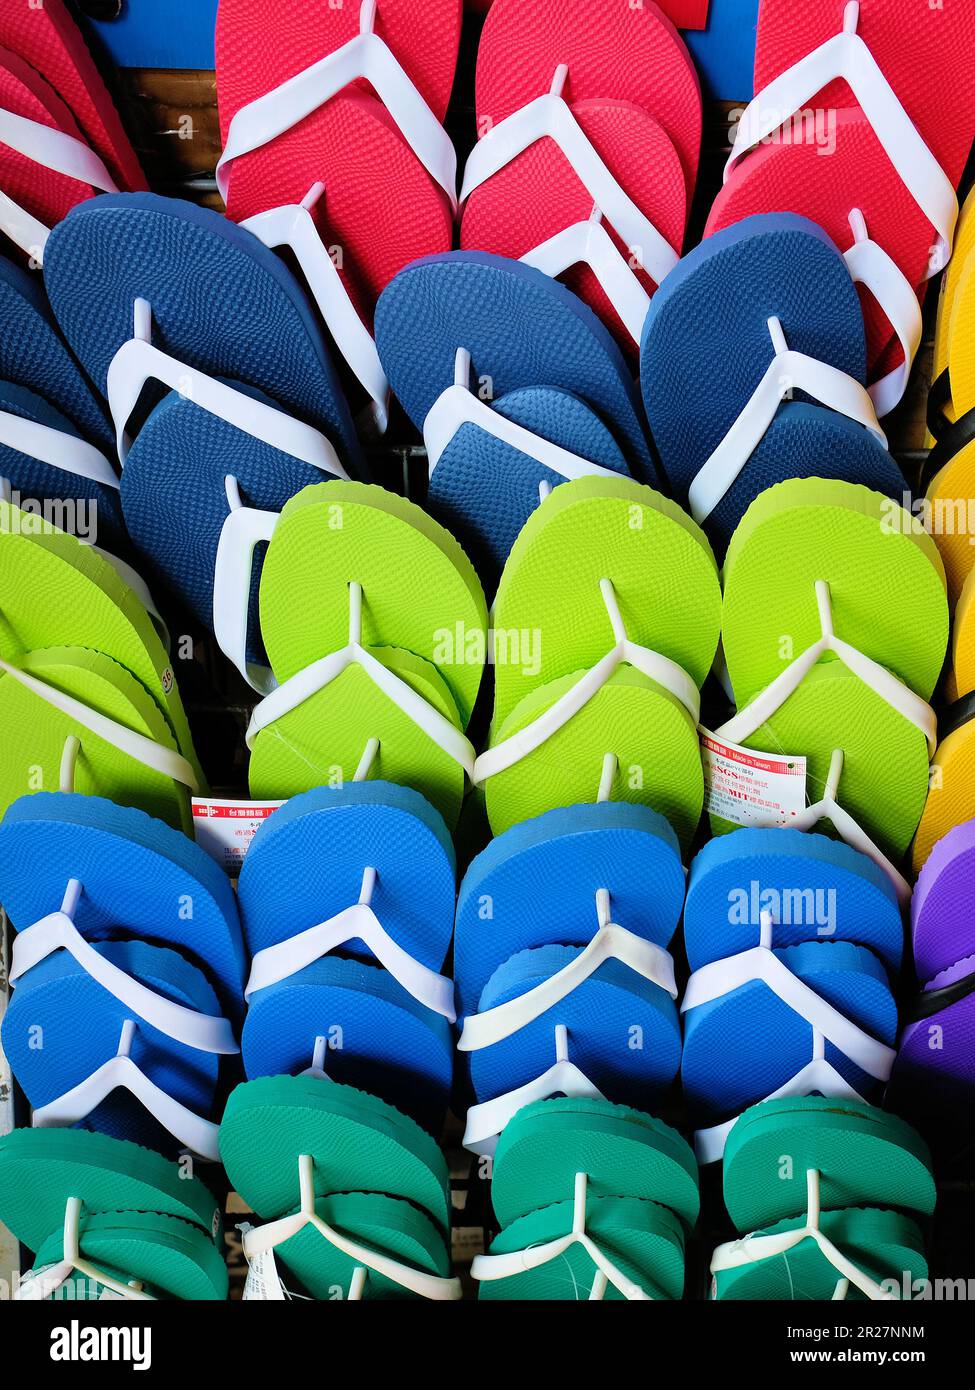 Rows of  many colorful flip flops for sale on the Island of Xiaoliuqiu in Taiwan, ROC; comfortable beachwear or footwear. Stock Photo